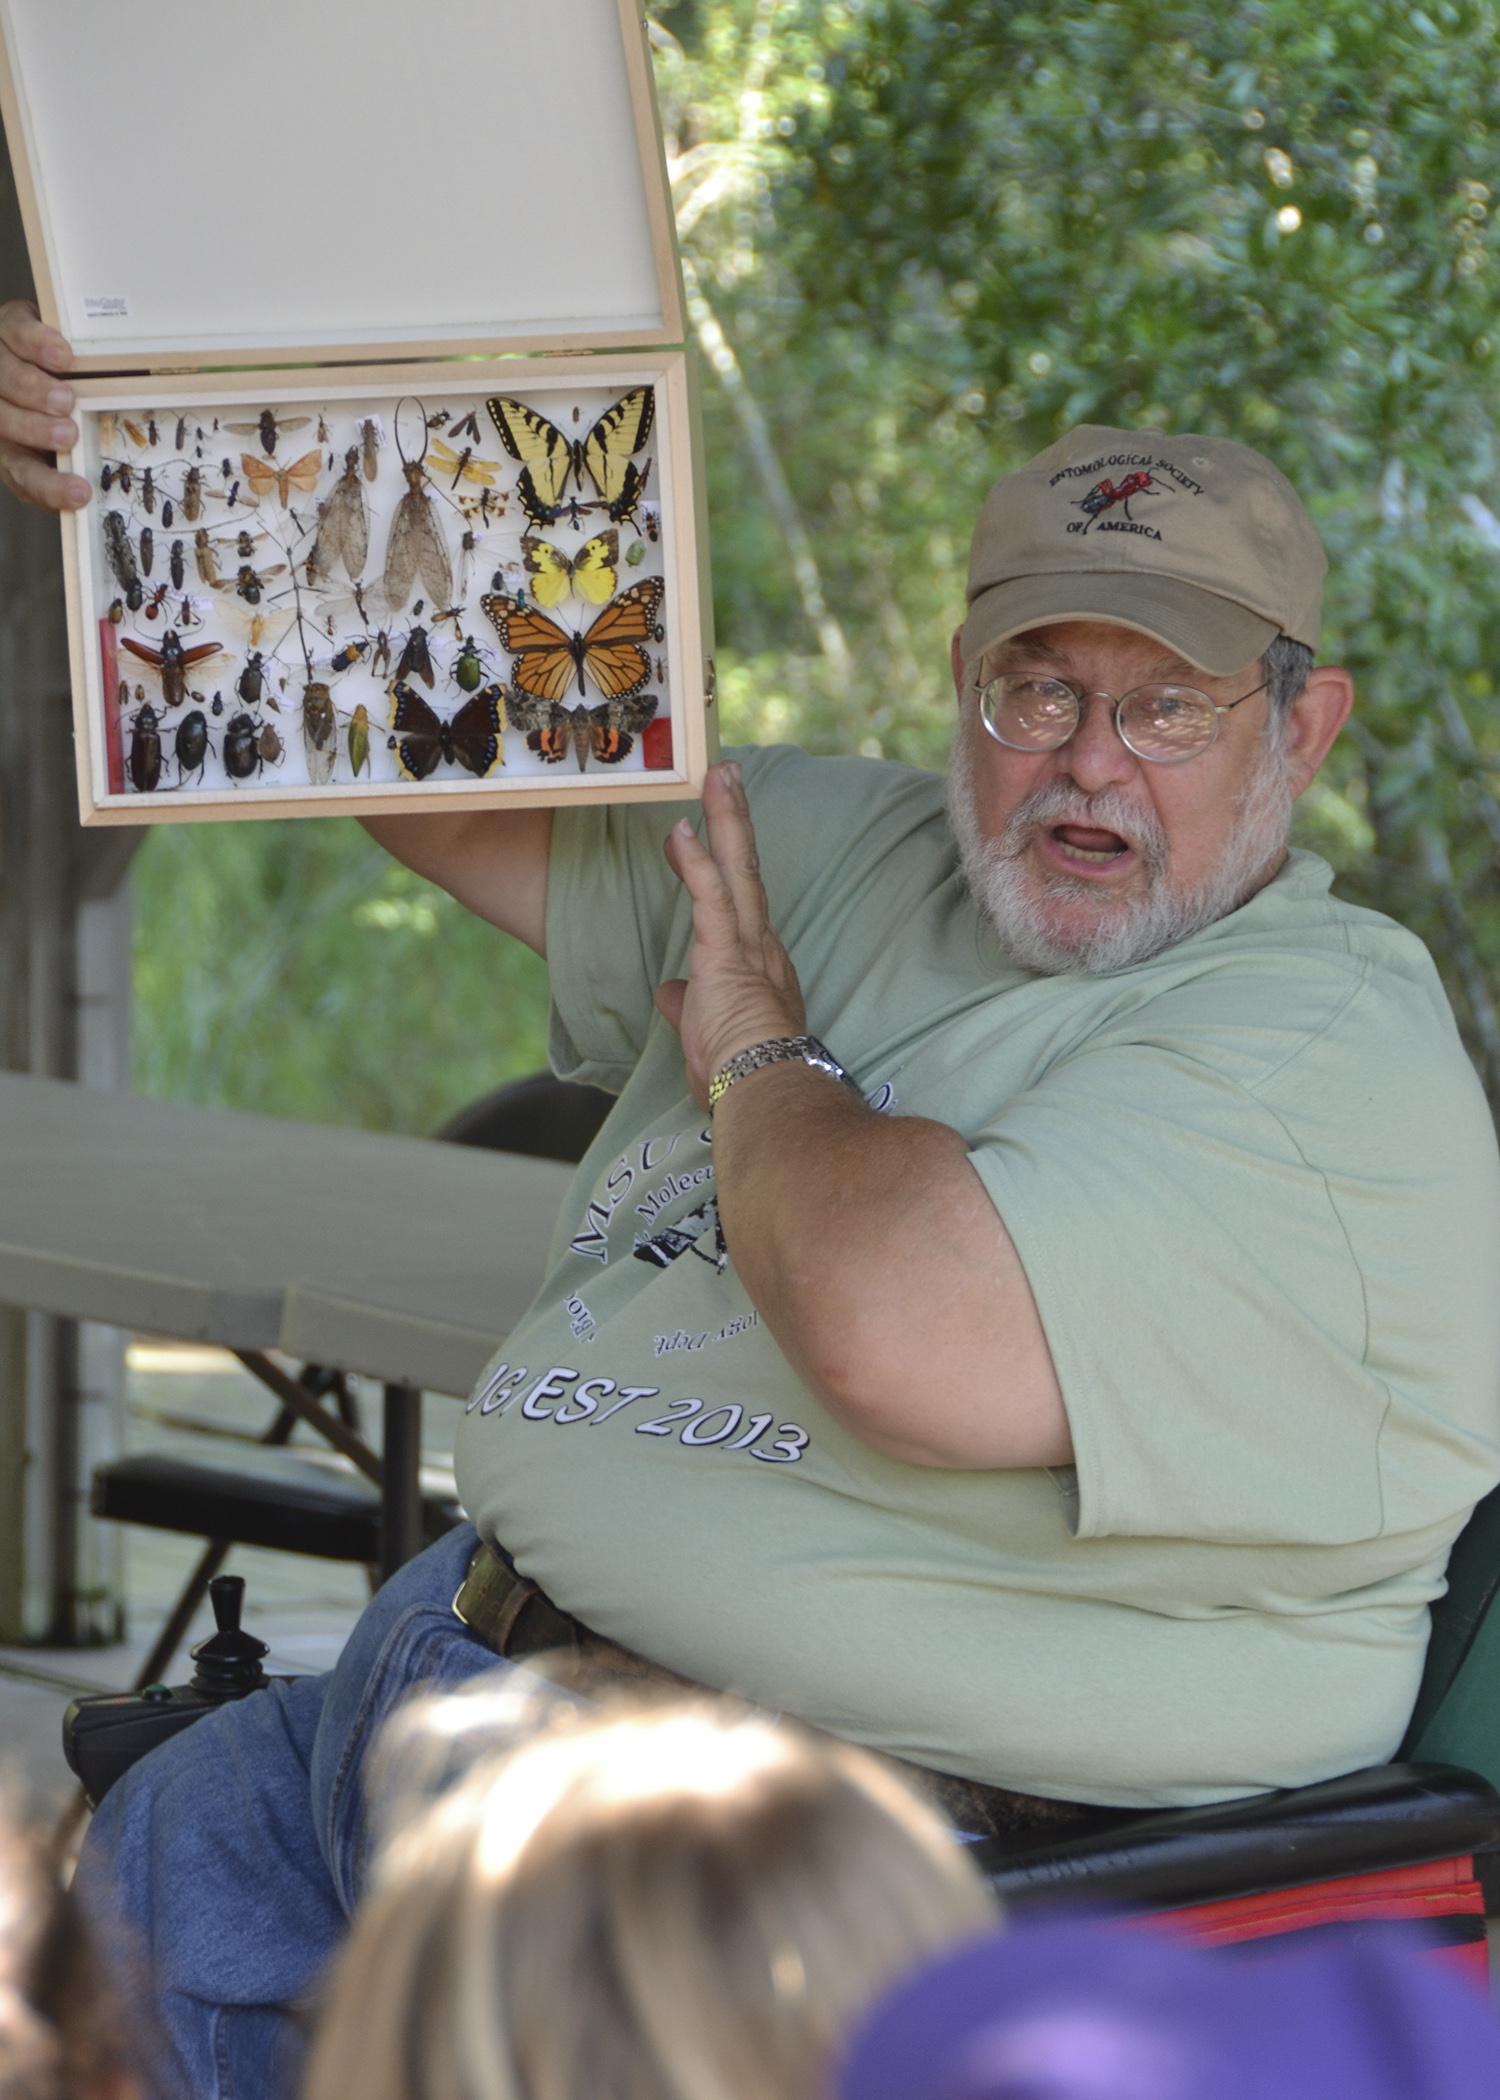 John Guyton, Mississippi State University Extension entomology specialist, shares an insect collection with a school group on Sept. 27, 2013, during Bugfest at the Crosby Arboretum in Picayune. Participants in this year's two-day event can take part in insect collection and identification, tours of the pitcher plant bog, tree identification hikes, a beekeeping tutorial and more. (Photo by MSU Ag Communications/Susan Collins-Smith)